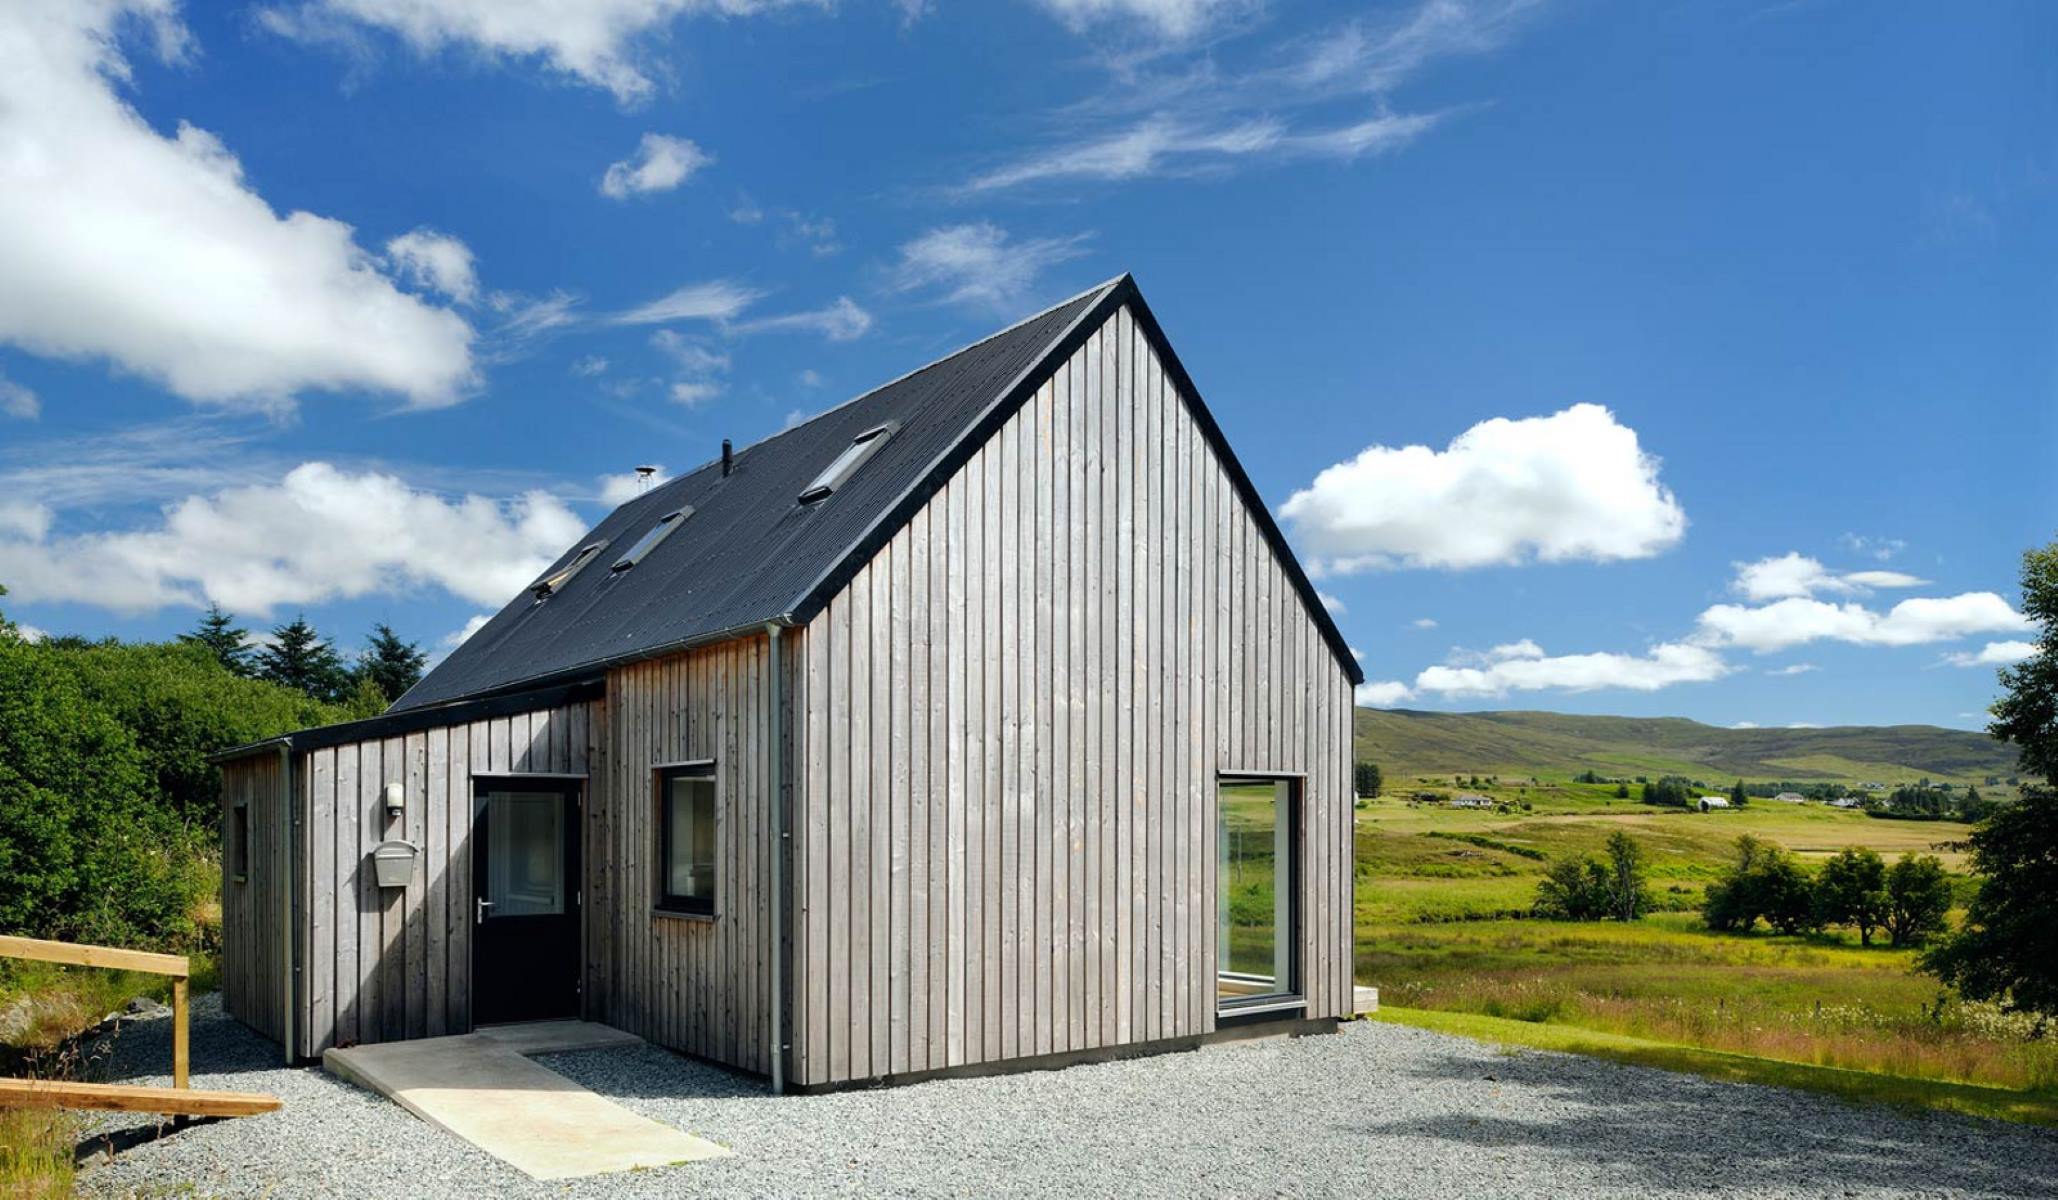 How To Design A Rural House